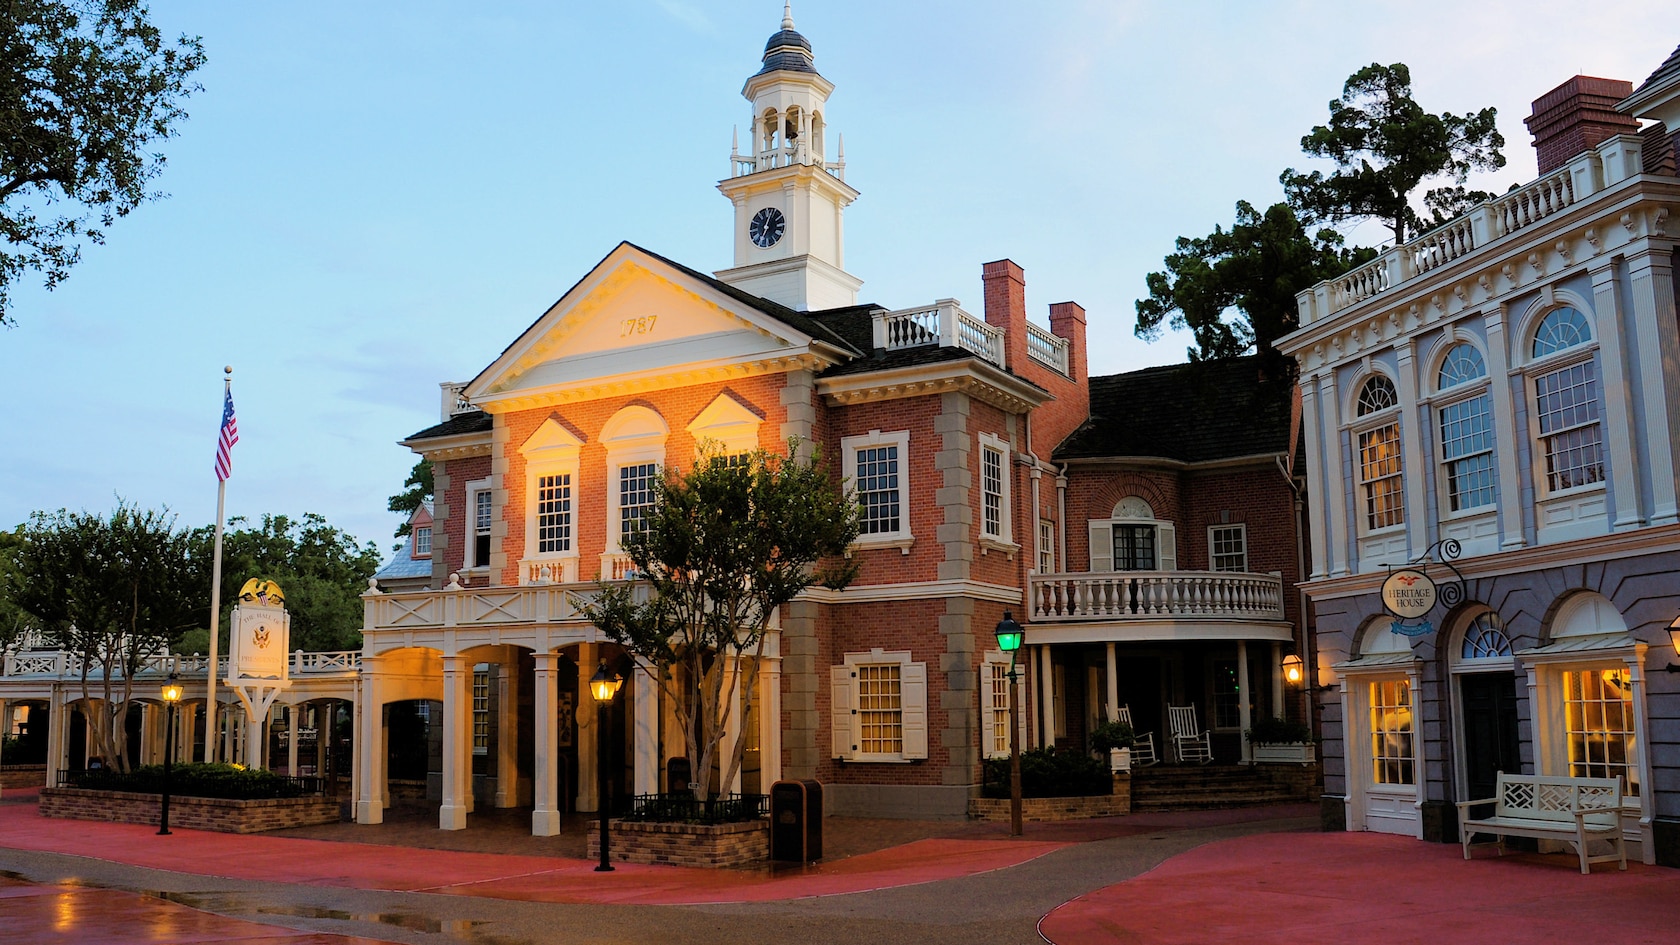 The Colonial brick building of the Hall of Presidents has a clock tower with a bell and a weather vane